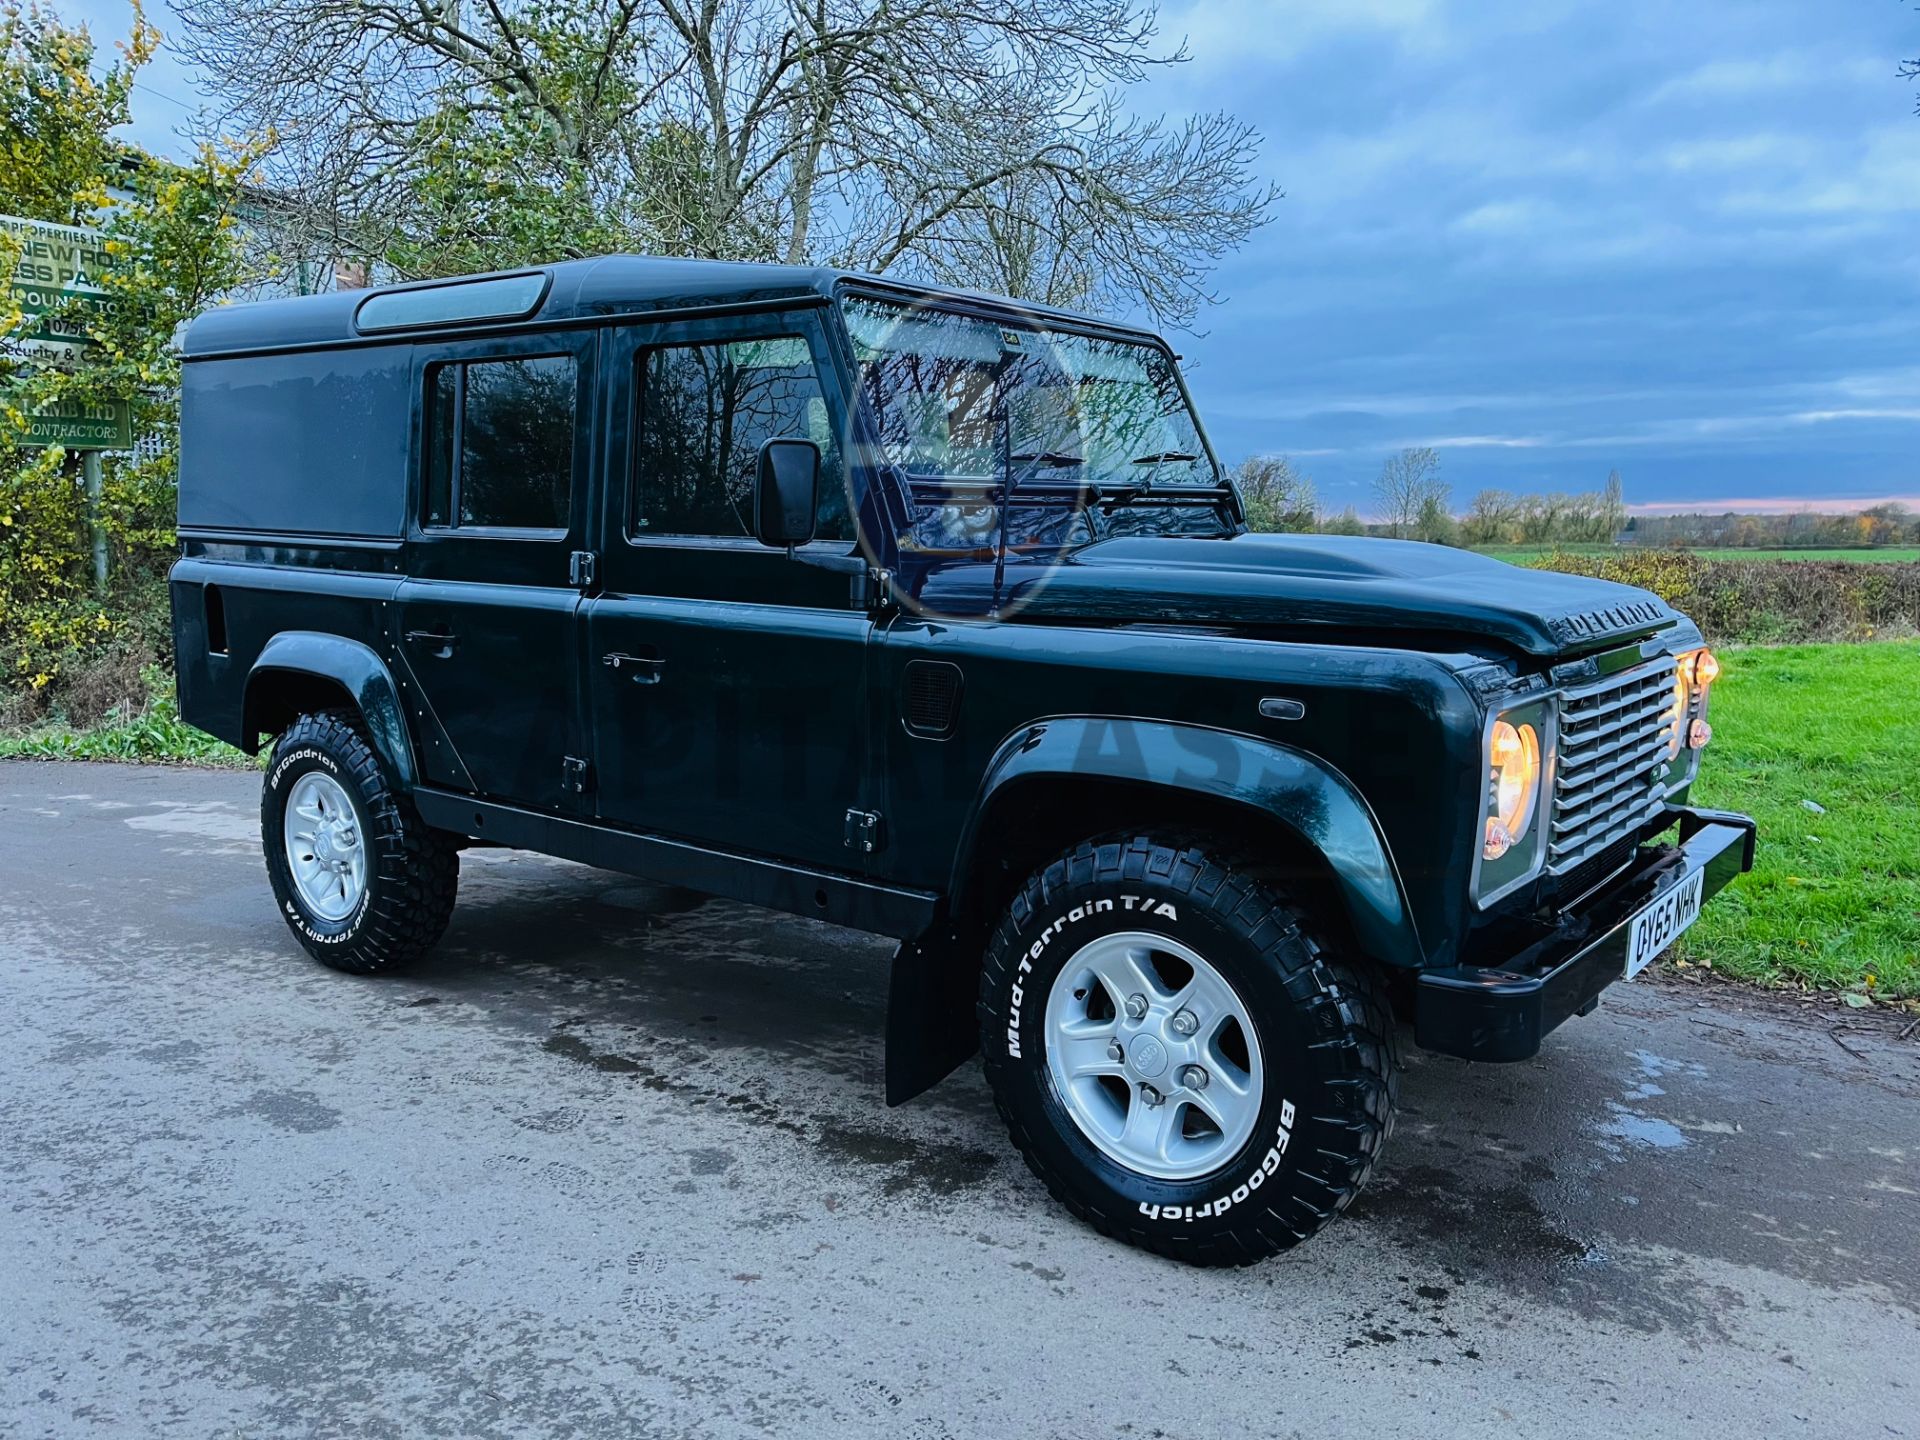 (ON SALE) LAND ROVER DEFENDER 110 *COUNTY-UTILITY WAGON* 2.2 TDCI (2016 MODEL) ONLY 37K MILES!! - Image 2 of 24